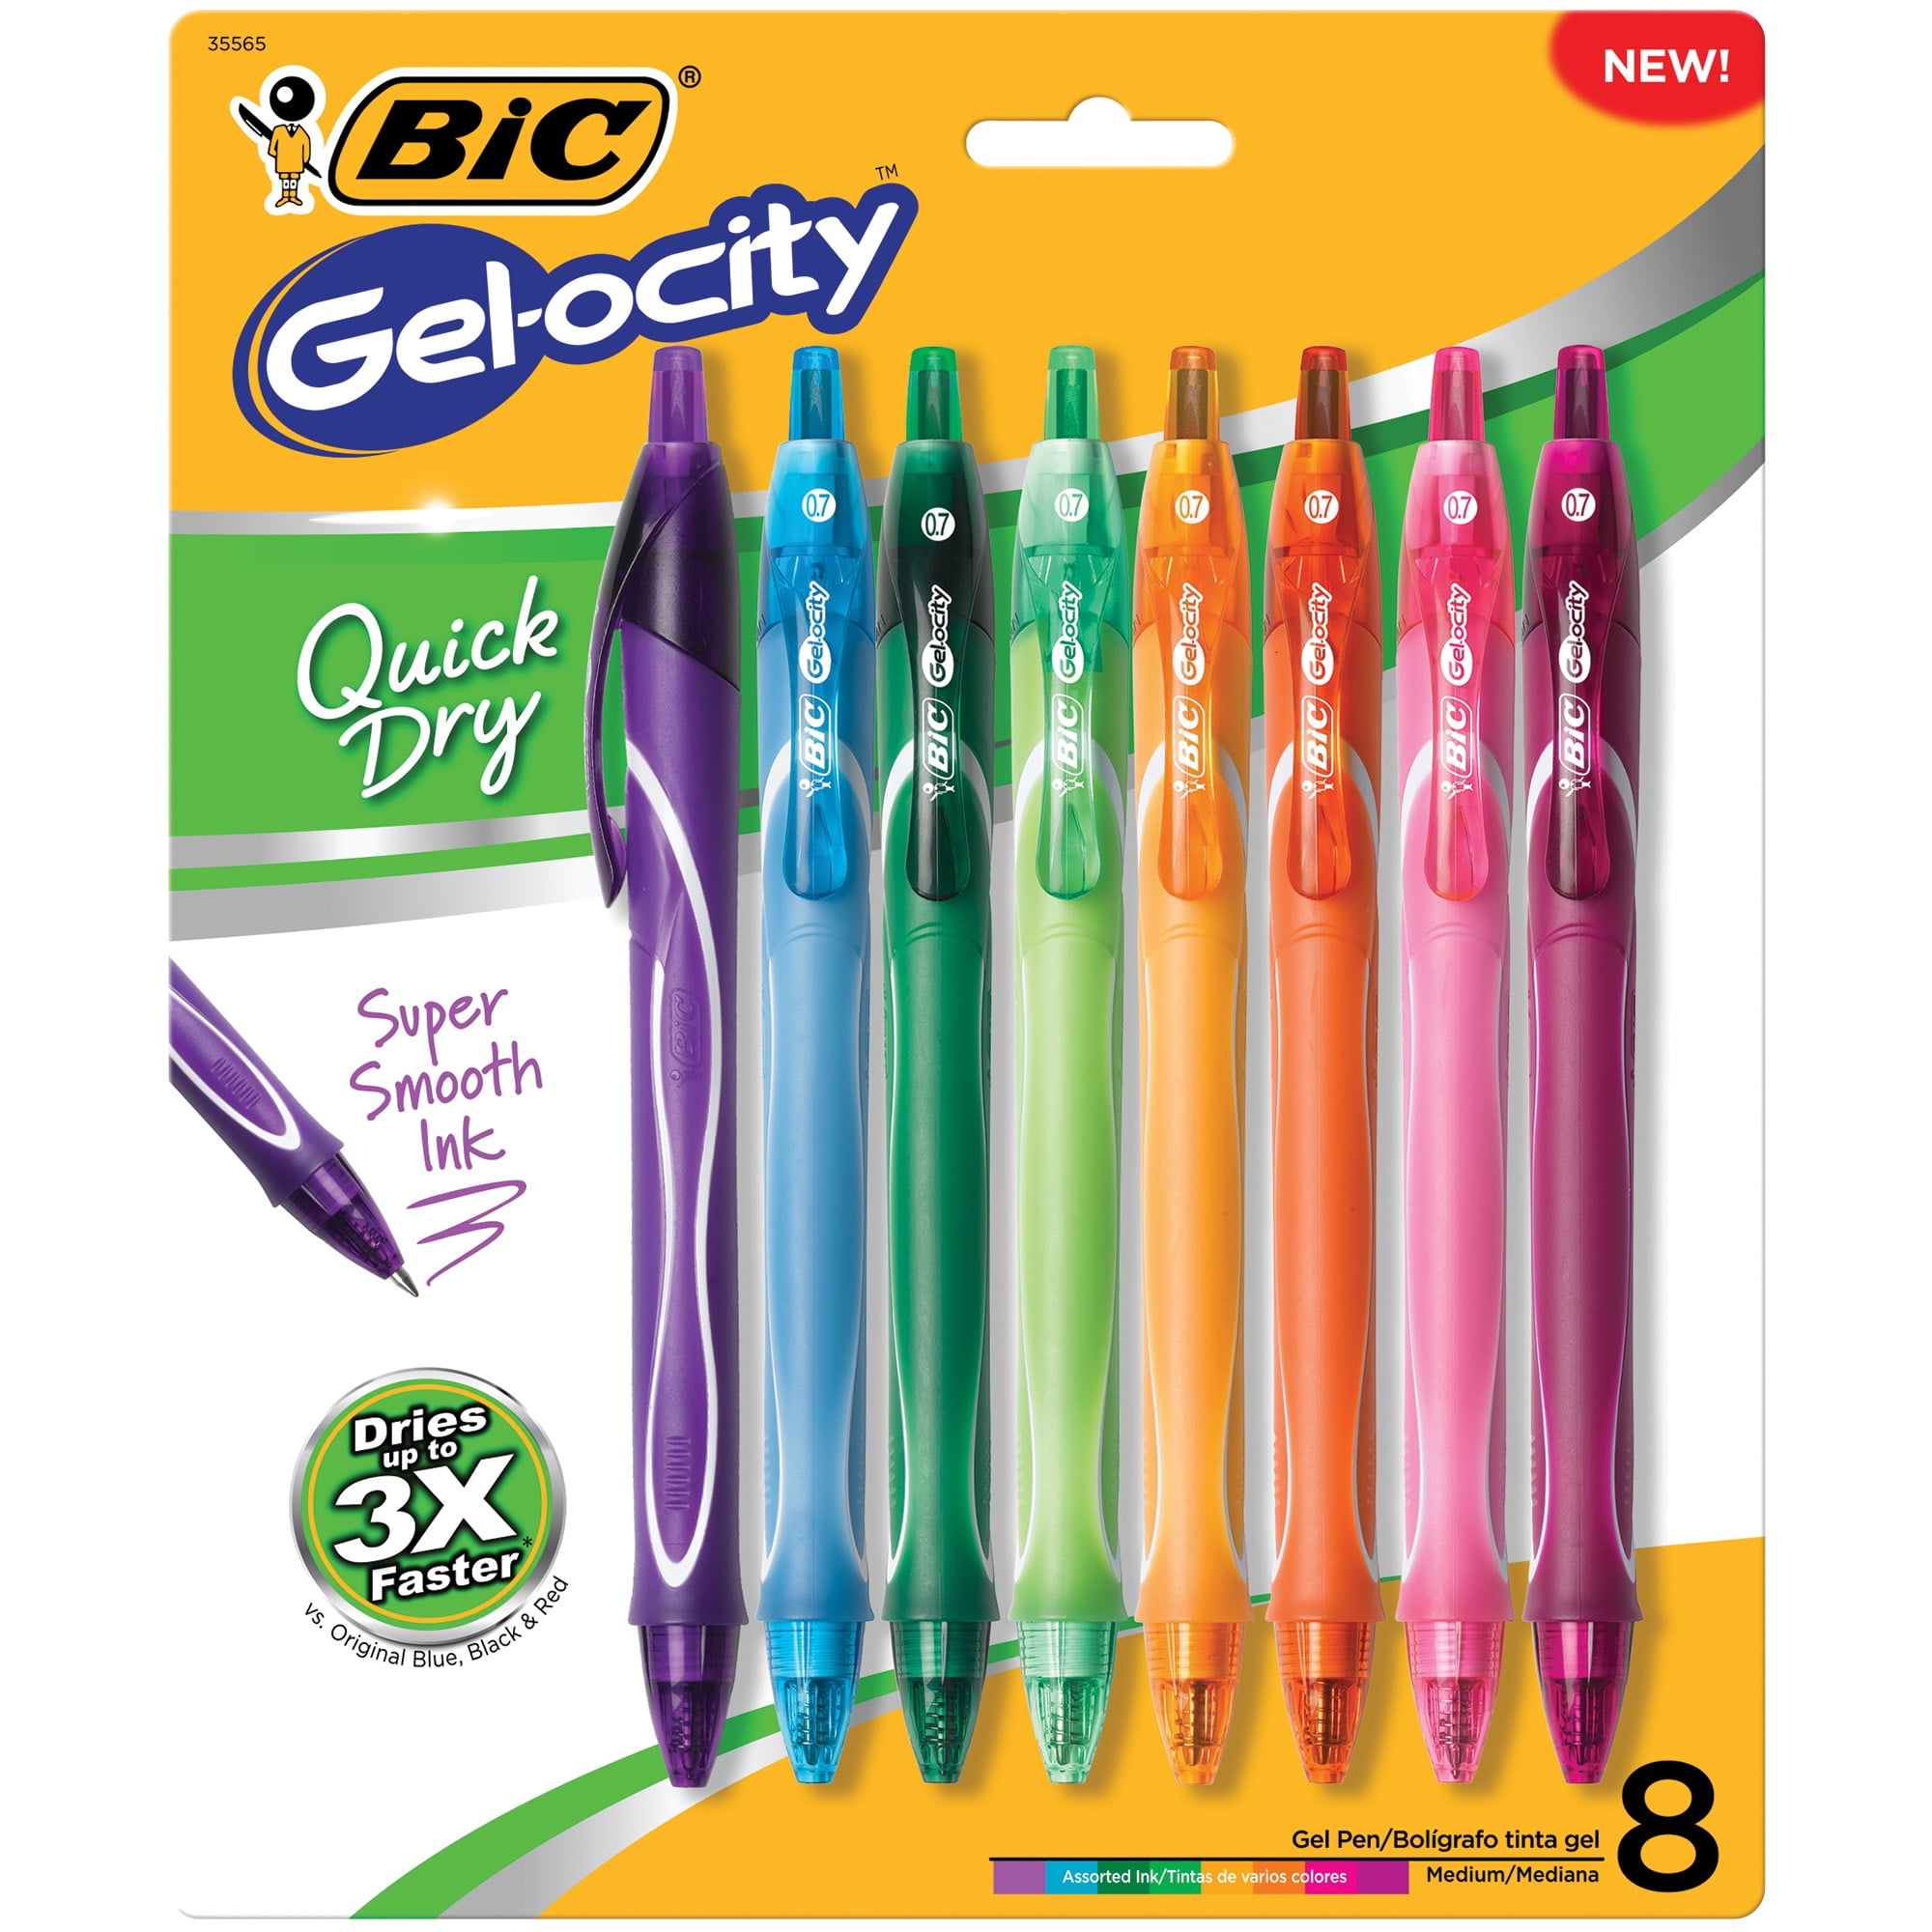 BIC Gel-ocity Quick Dry Assorted Colors Gel Pens, Medium Point (0.7mm),  8-Count Pack, Retractable Gel Pens With Comfortable Full Grip, Colors may  vary